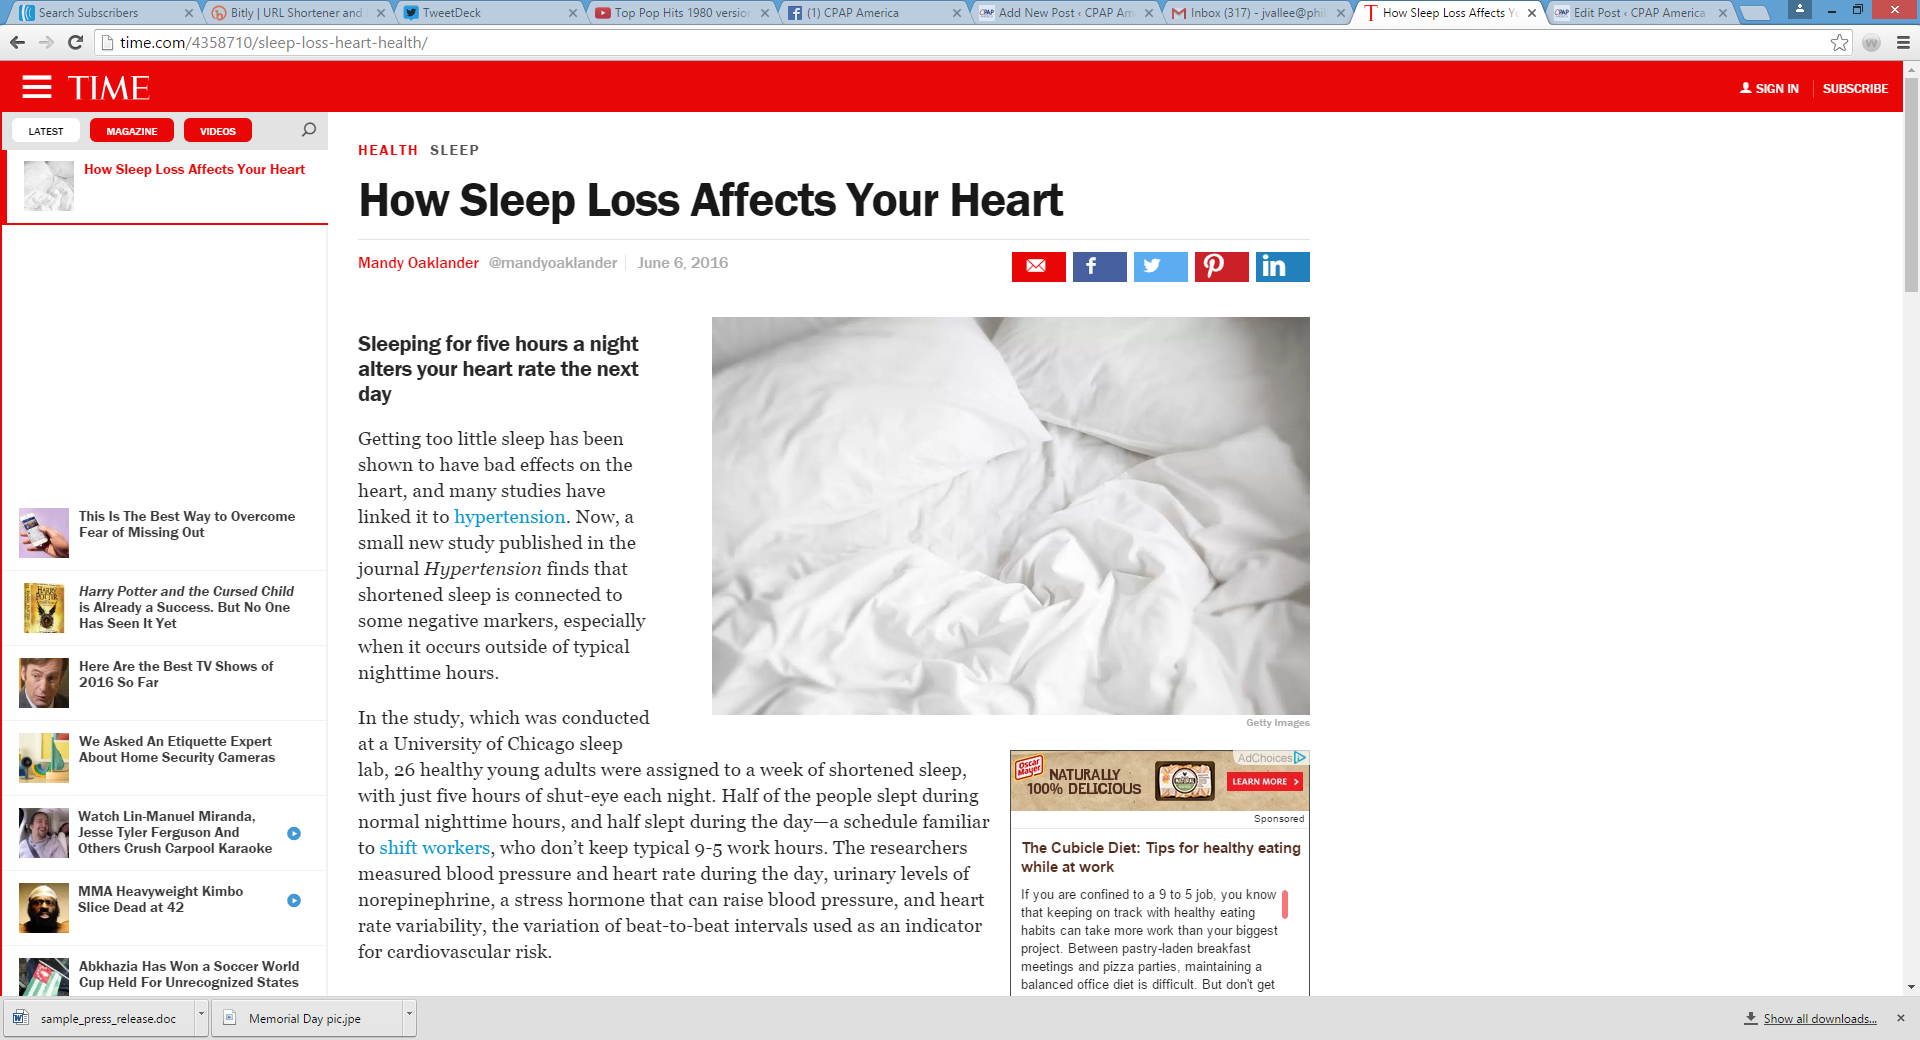 Sleep loss can affect your heart